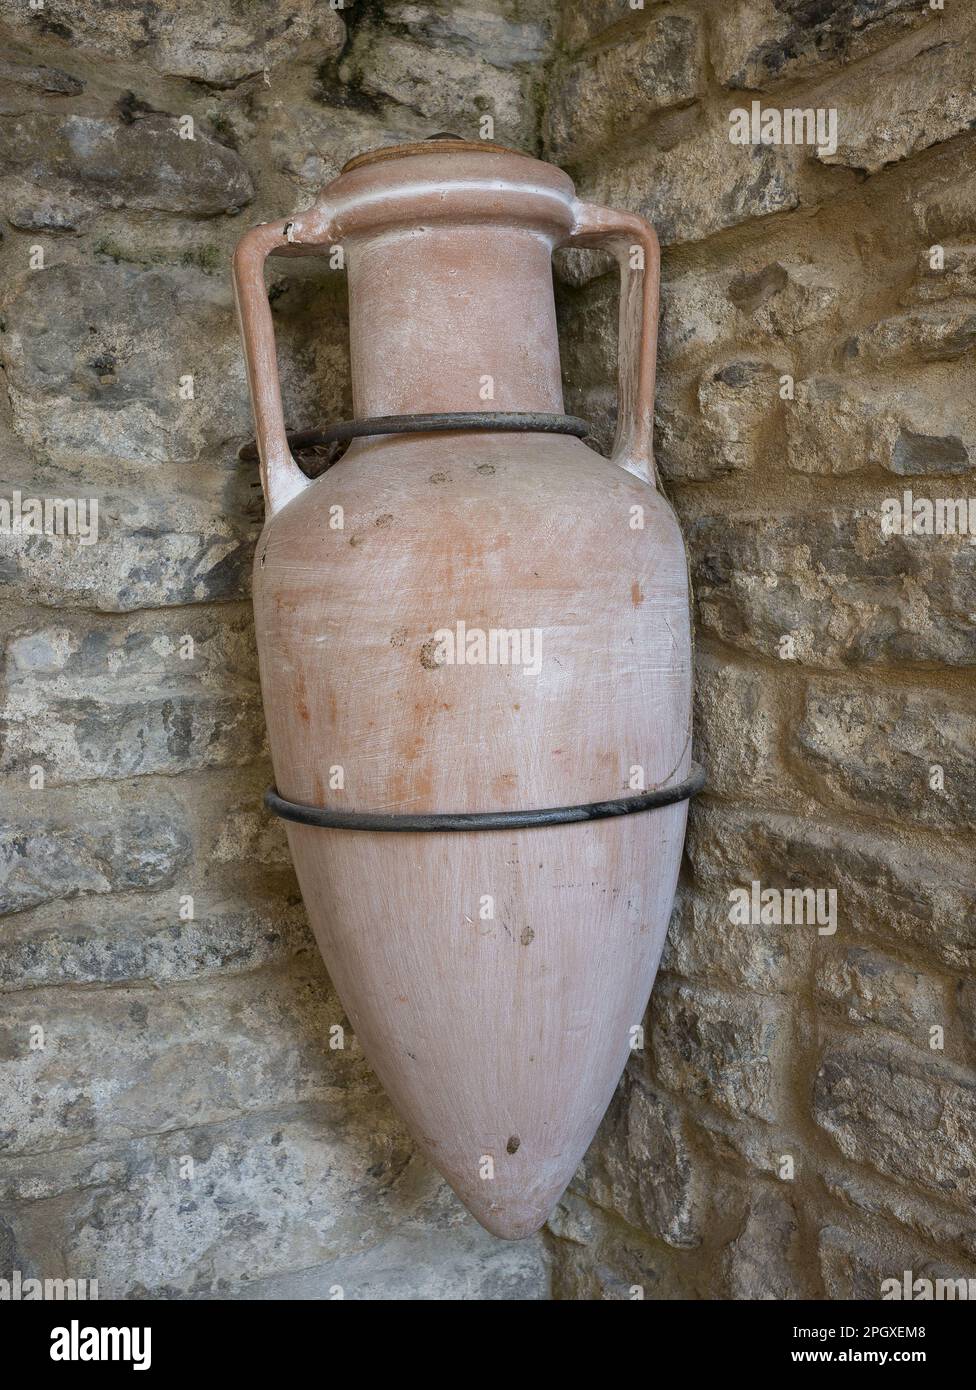 ancient Roman amphora hanging on a stone wall for decorative purposes Stock Photo